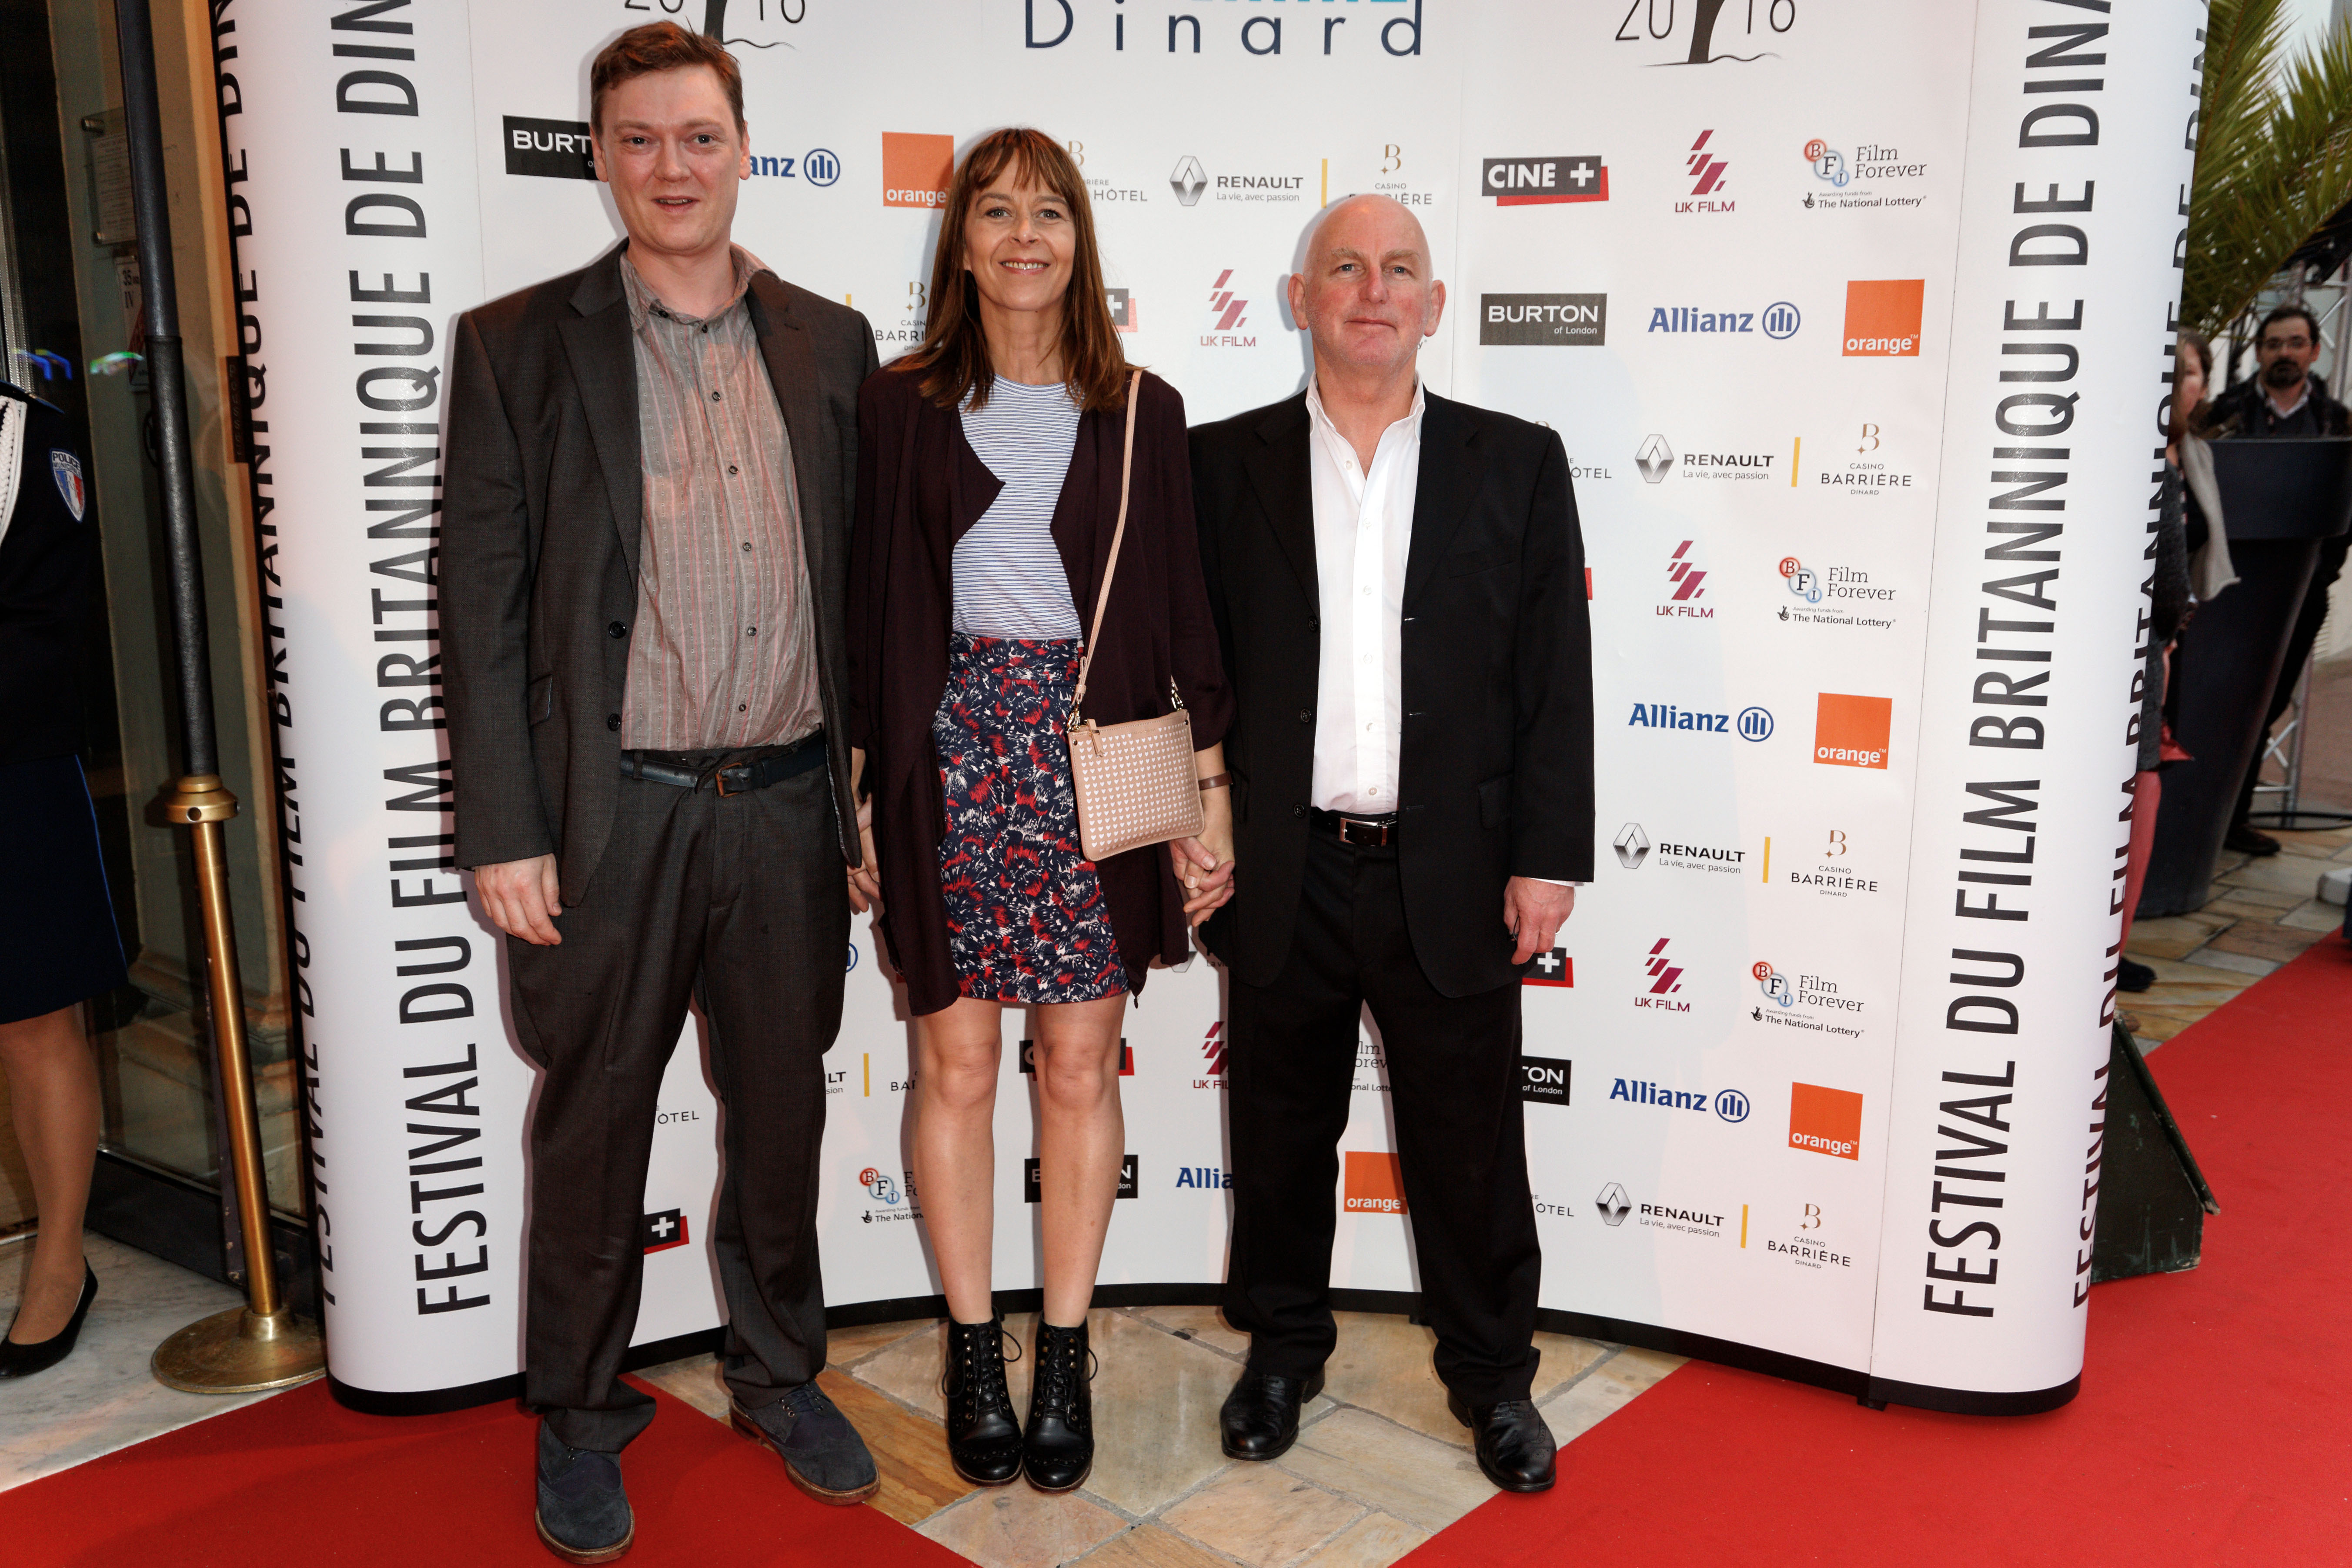 Kenny Dickie, Kate Dickie, and Gary Lewis attend the opening ceremony of the 27th Dinard British Film Festival on September 29, 2016, in Dinard, France. | Source: Getty Images